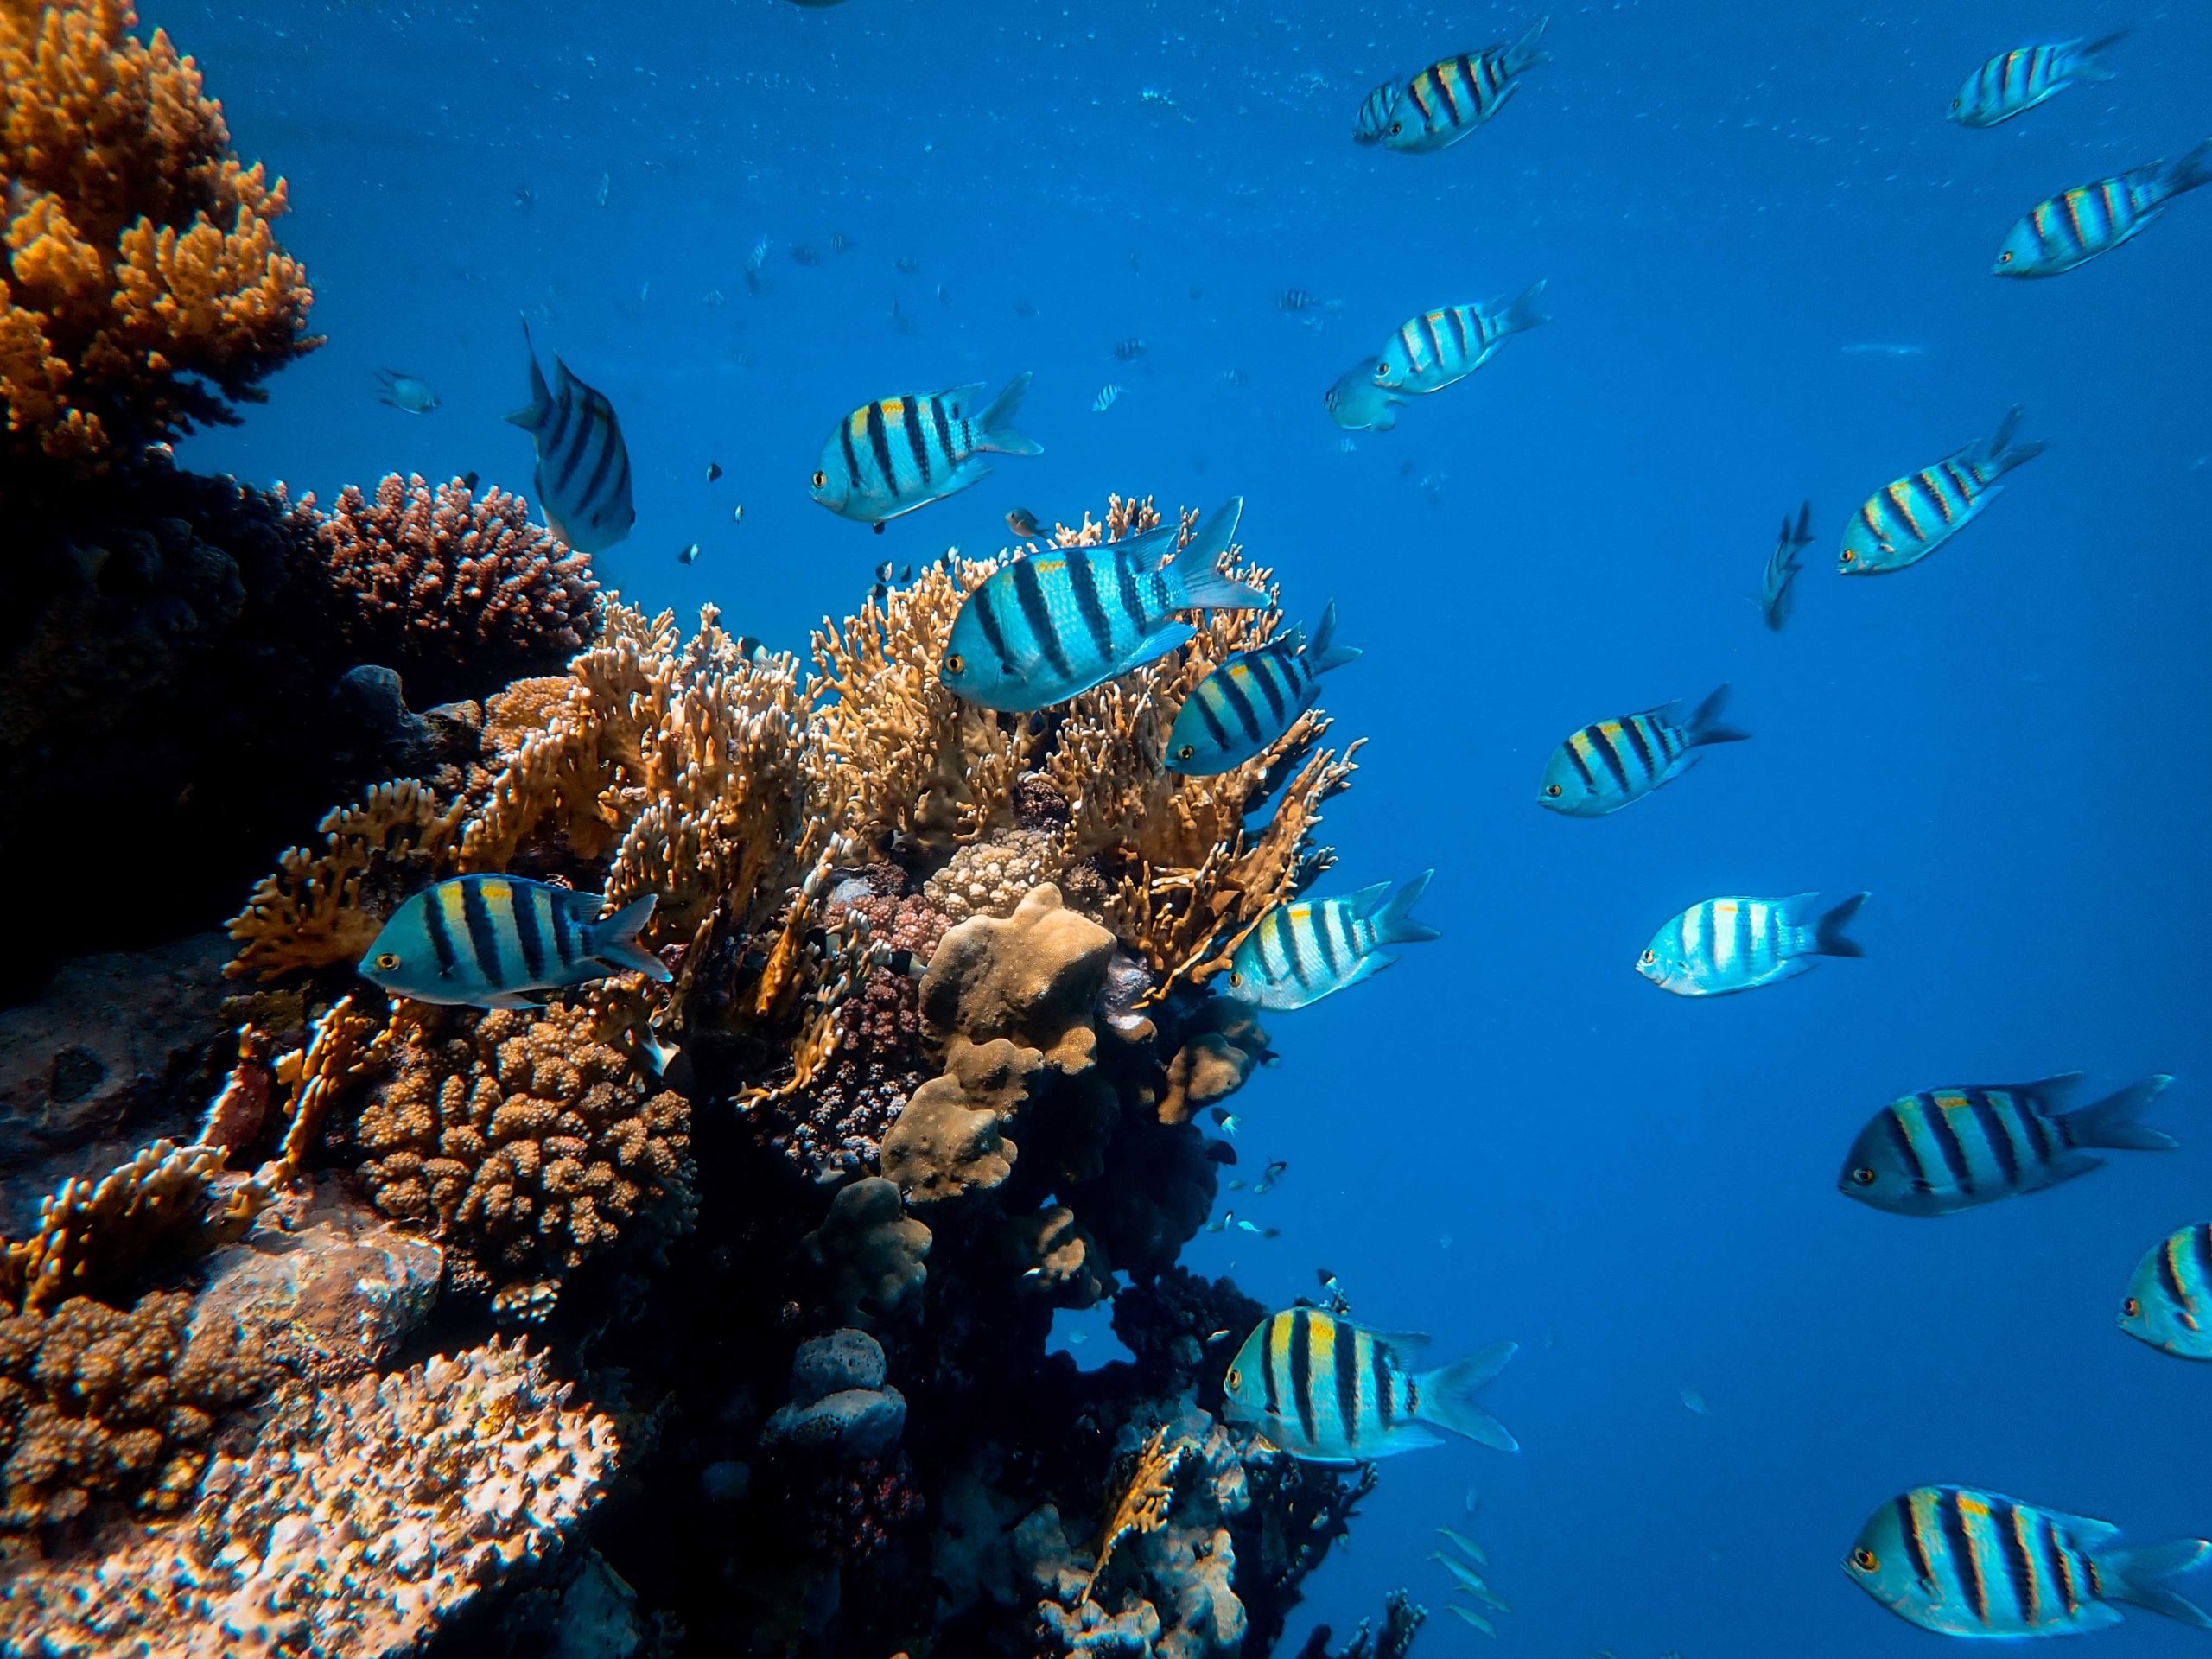 Our 2022 Impact: Protecting Coral Reefs that Can Adapt to Climate